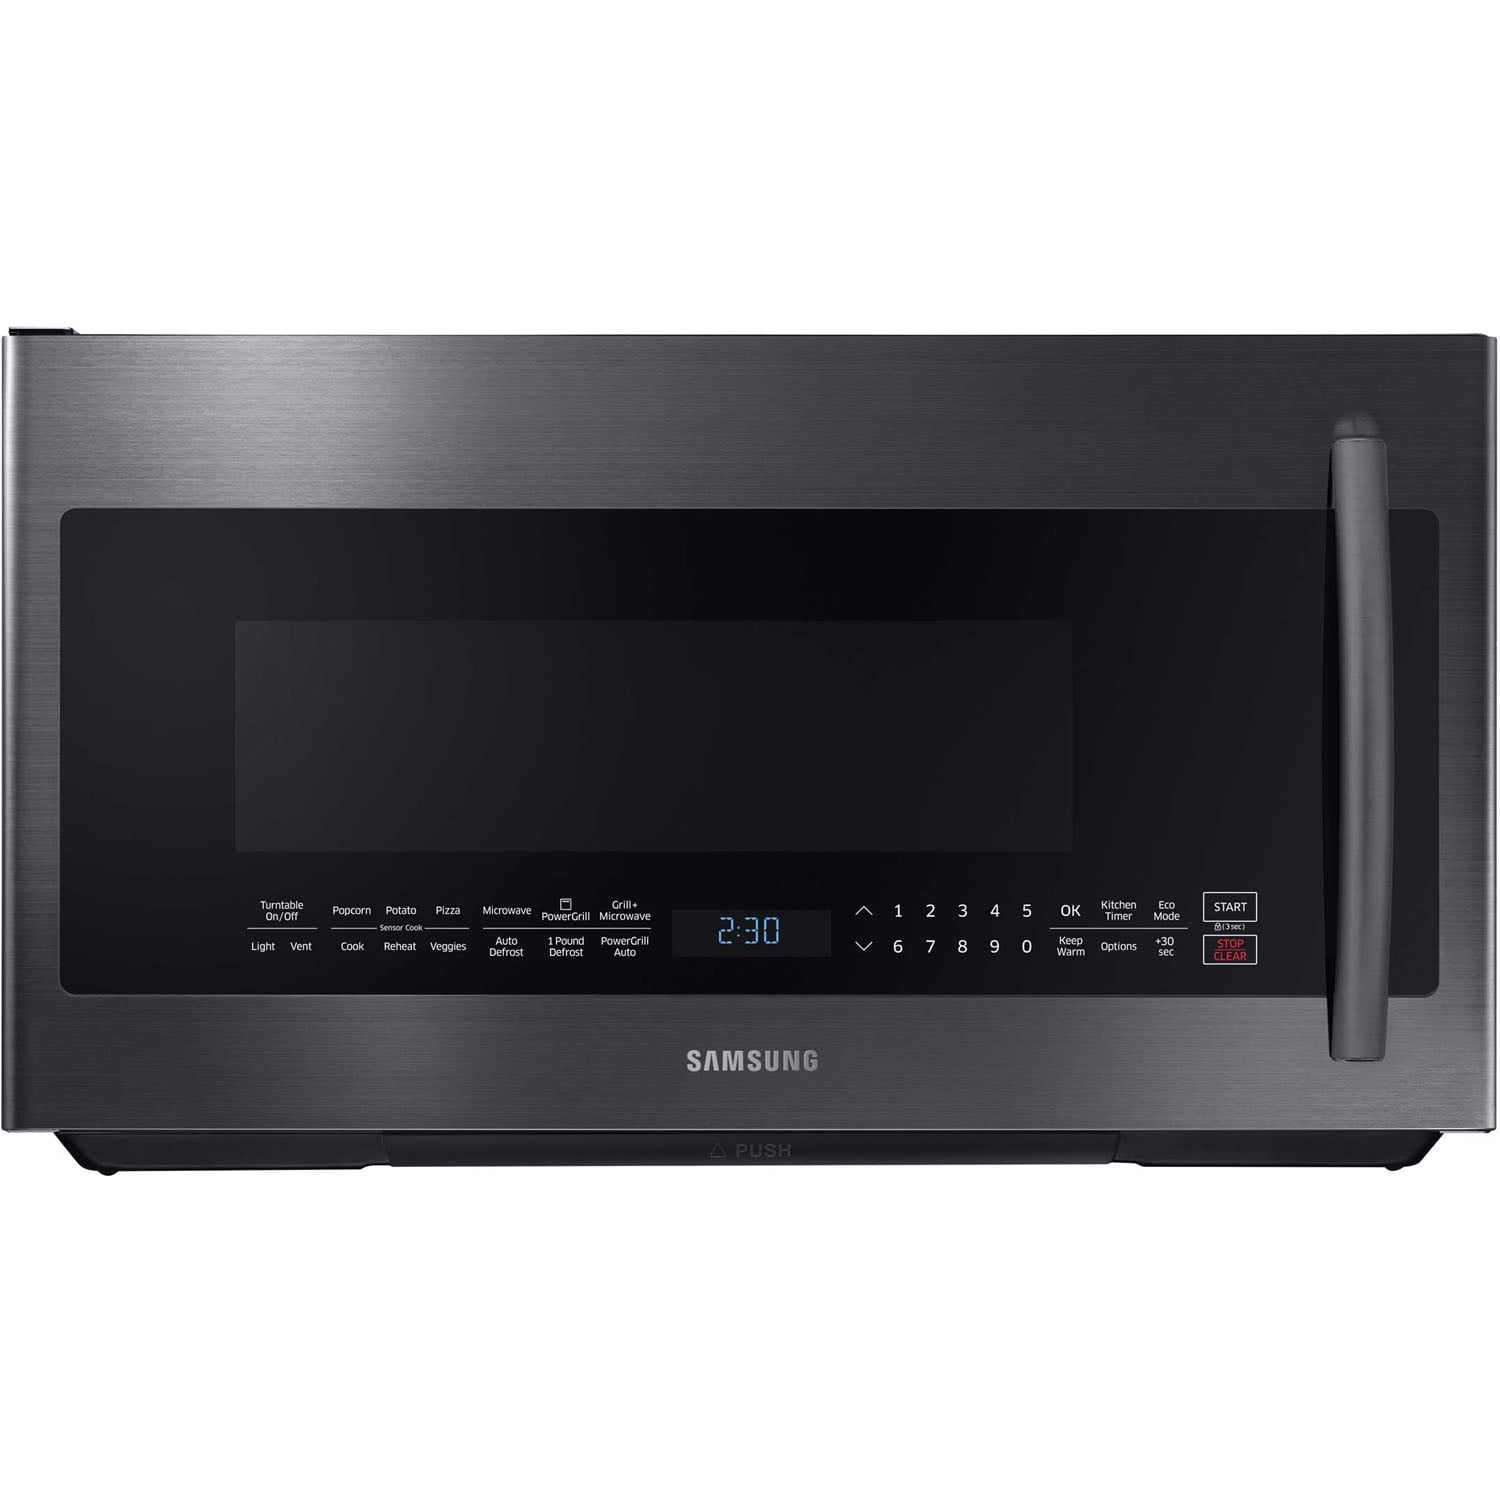 Samsung 2.1 cu. ft. Over-The-Range PowerGrill Microwave- Black Black Stainless Steel Samsung Microwave